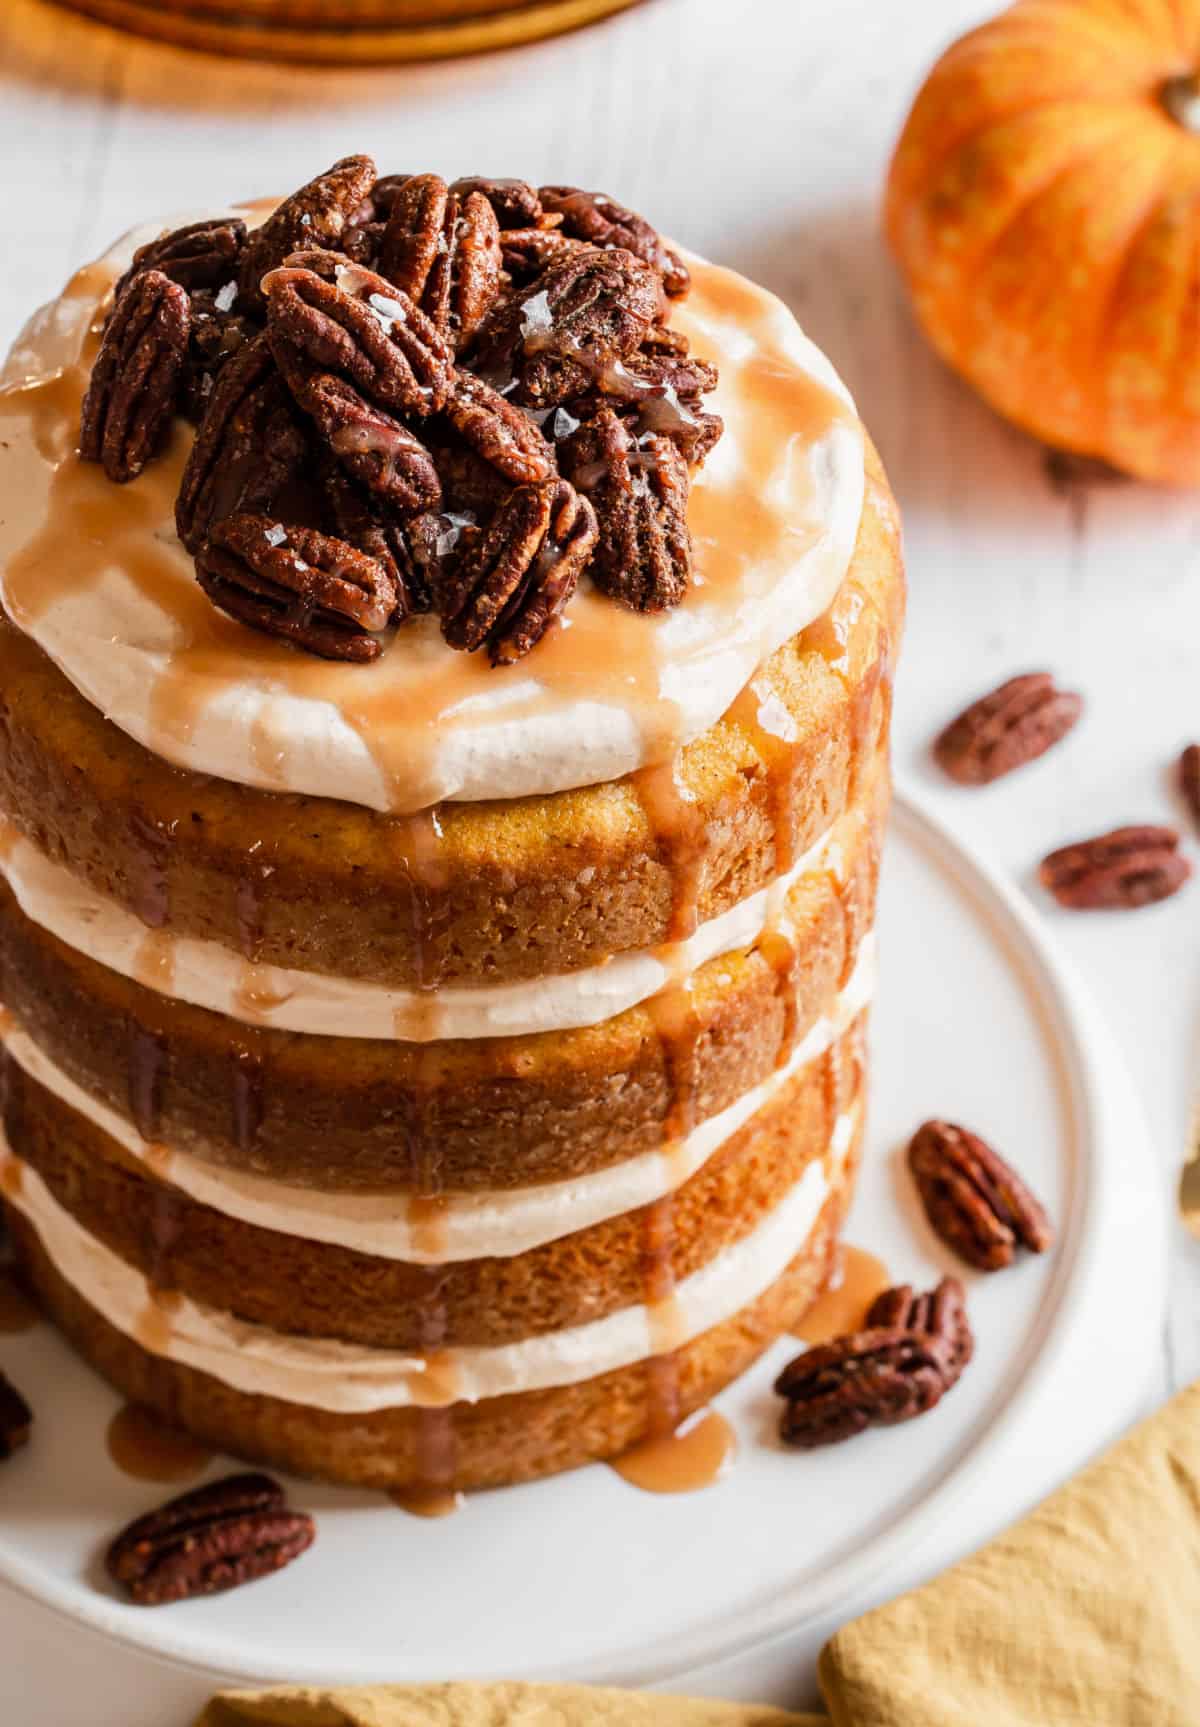 4 layer cake with candied pecans on top and caramel drizzle